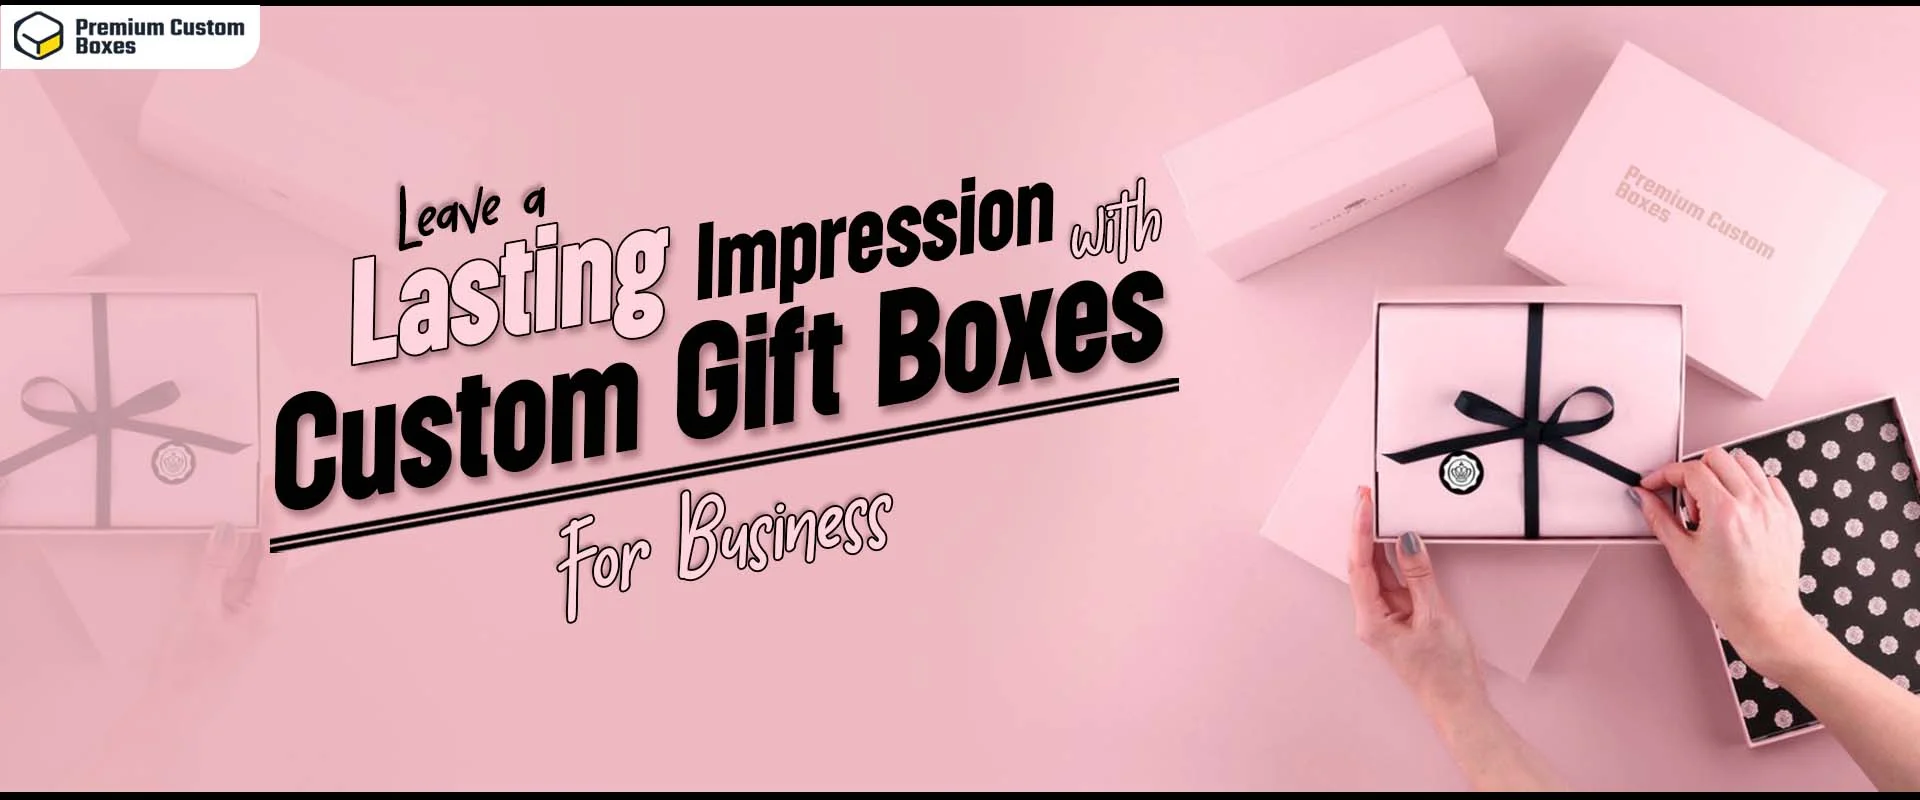 Leave a Lasting Impression With Custom Gift Boxes For Business